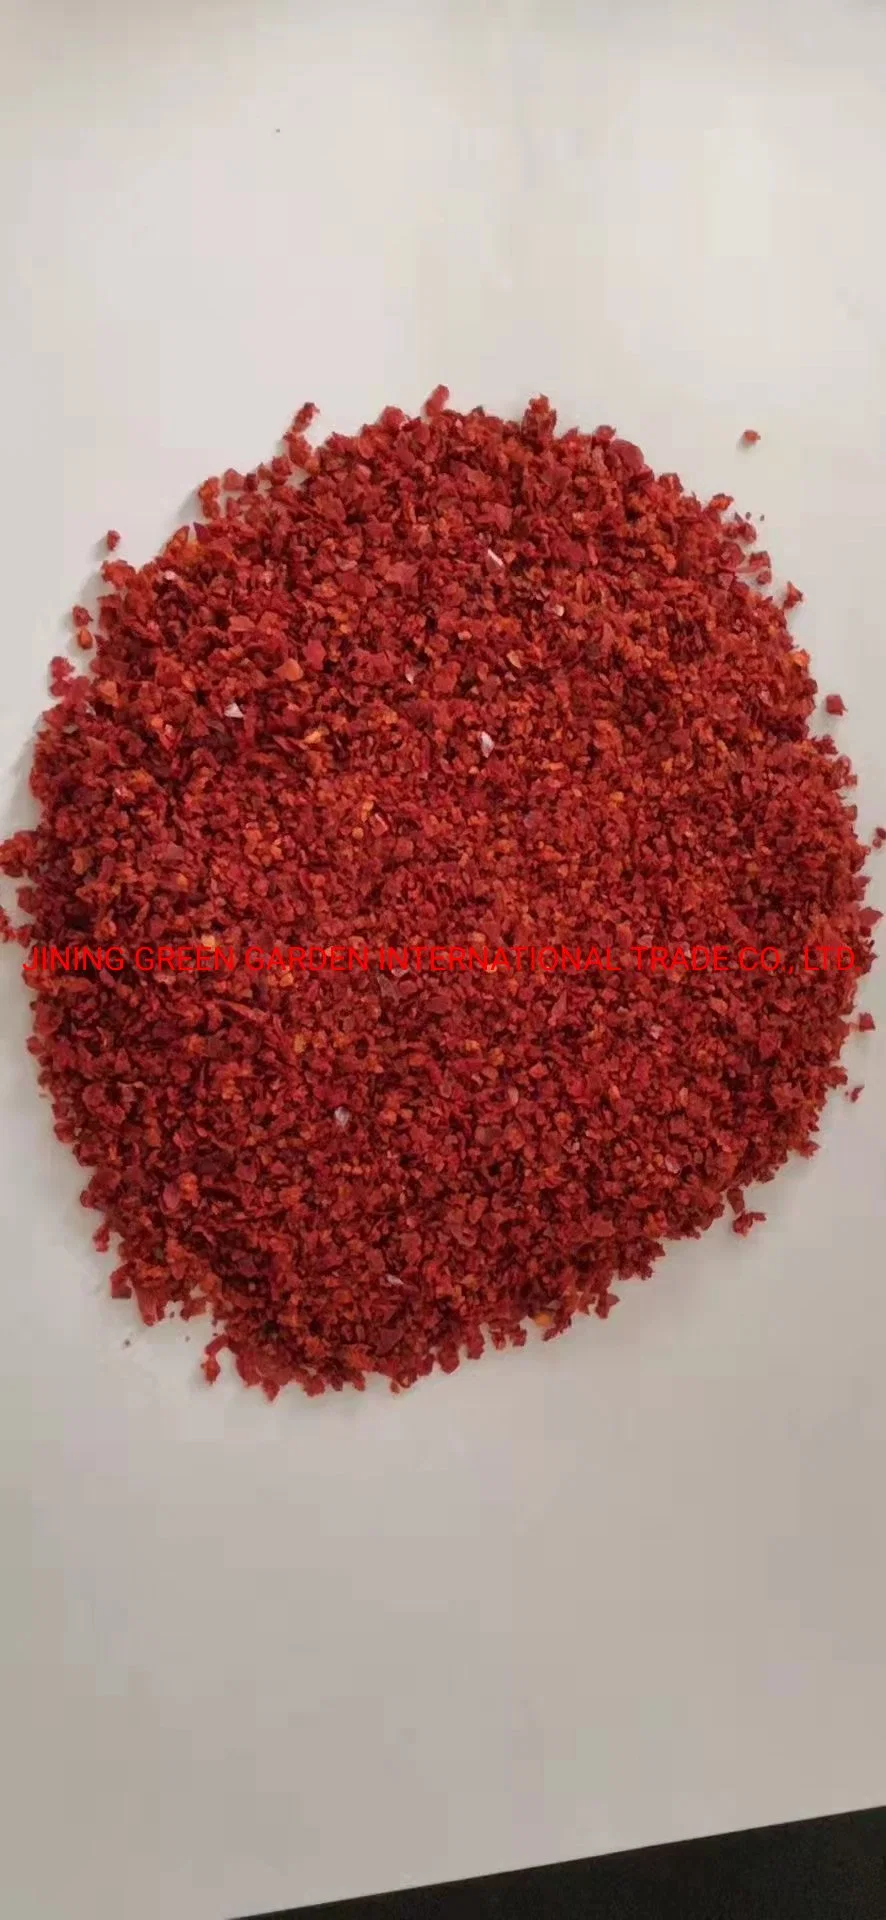 Red Pepper Powder Best Quality Chili Powder Red Red Chilli Powder Made in China Single Herbs & Spices Dried Raw HACCP